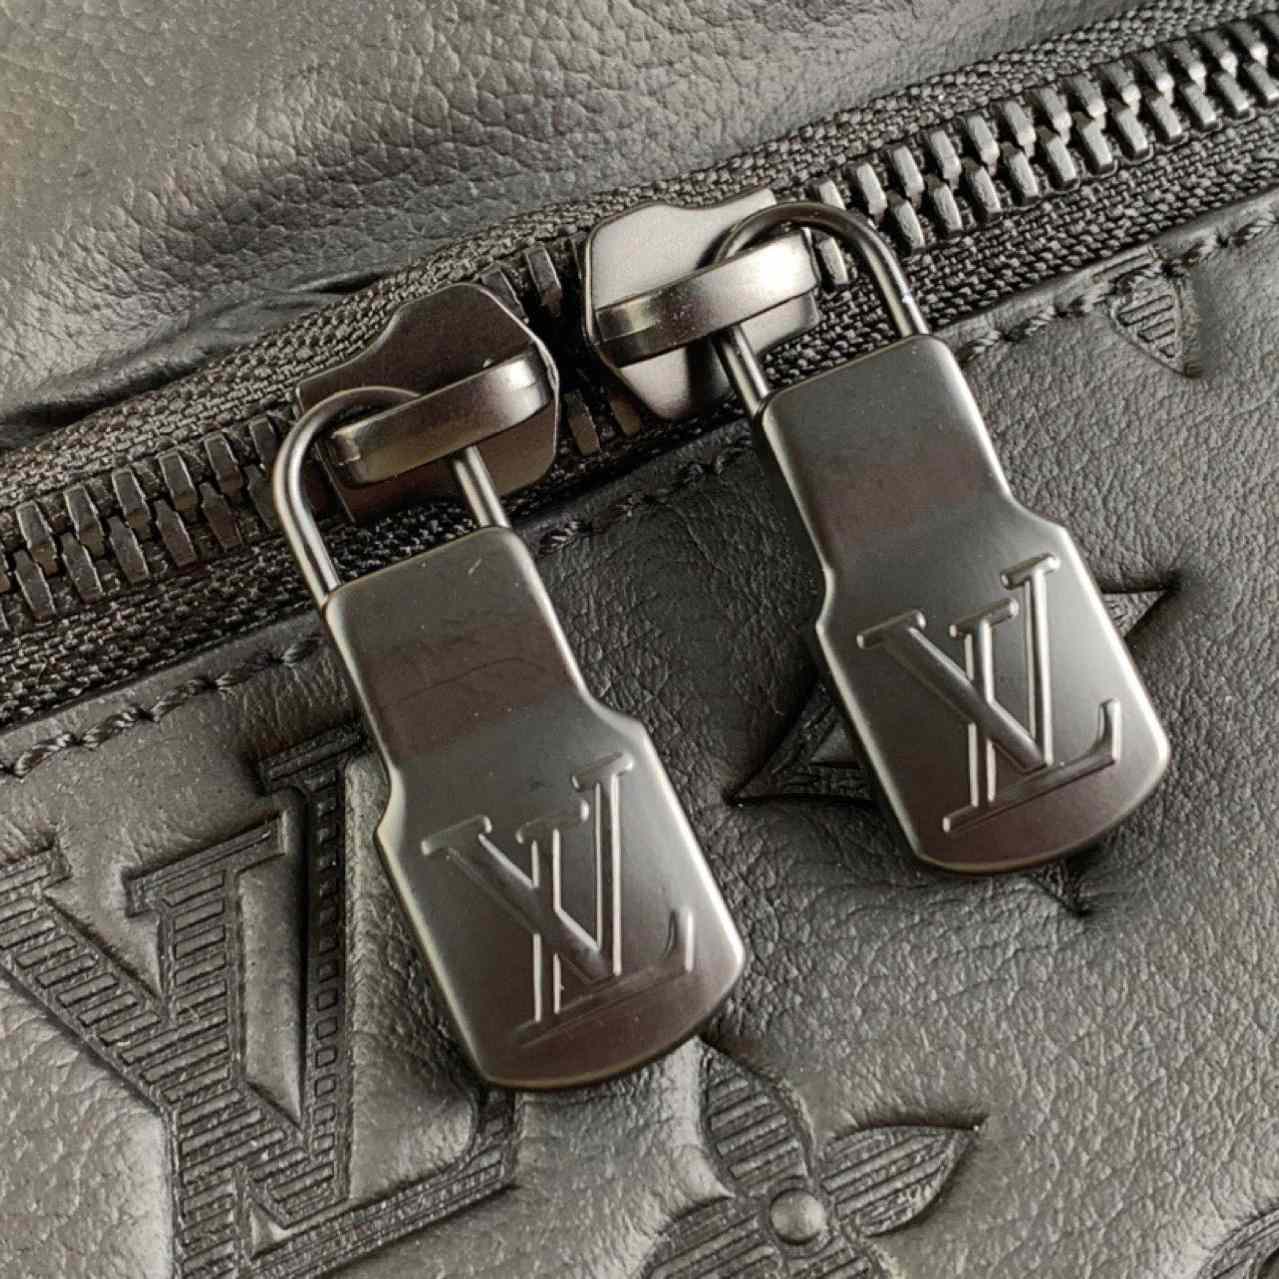 Louis Vuitton Discovery Discovery bumbag pm (M46036)